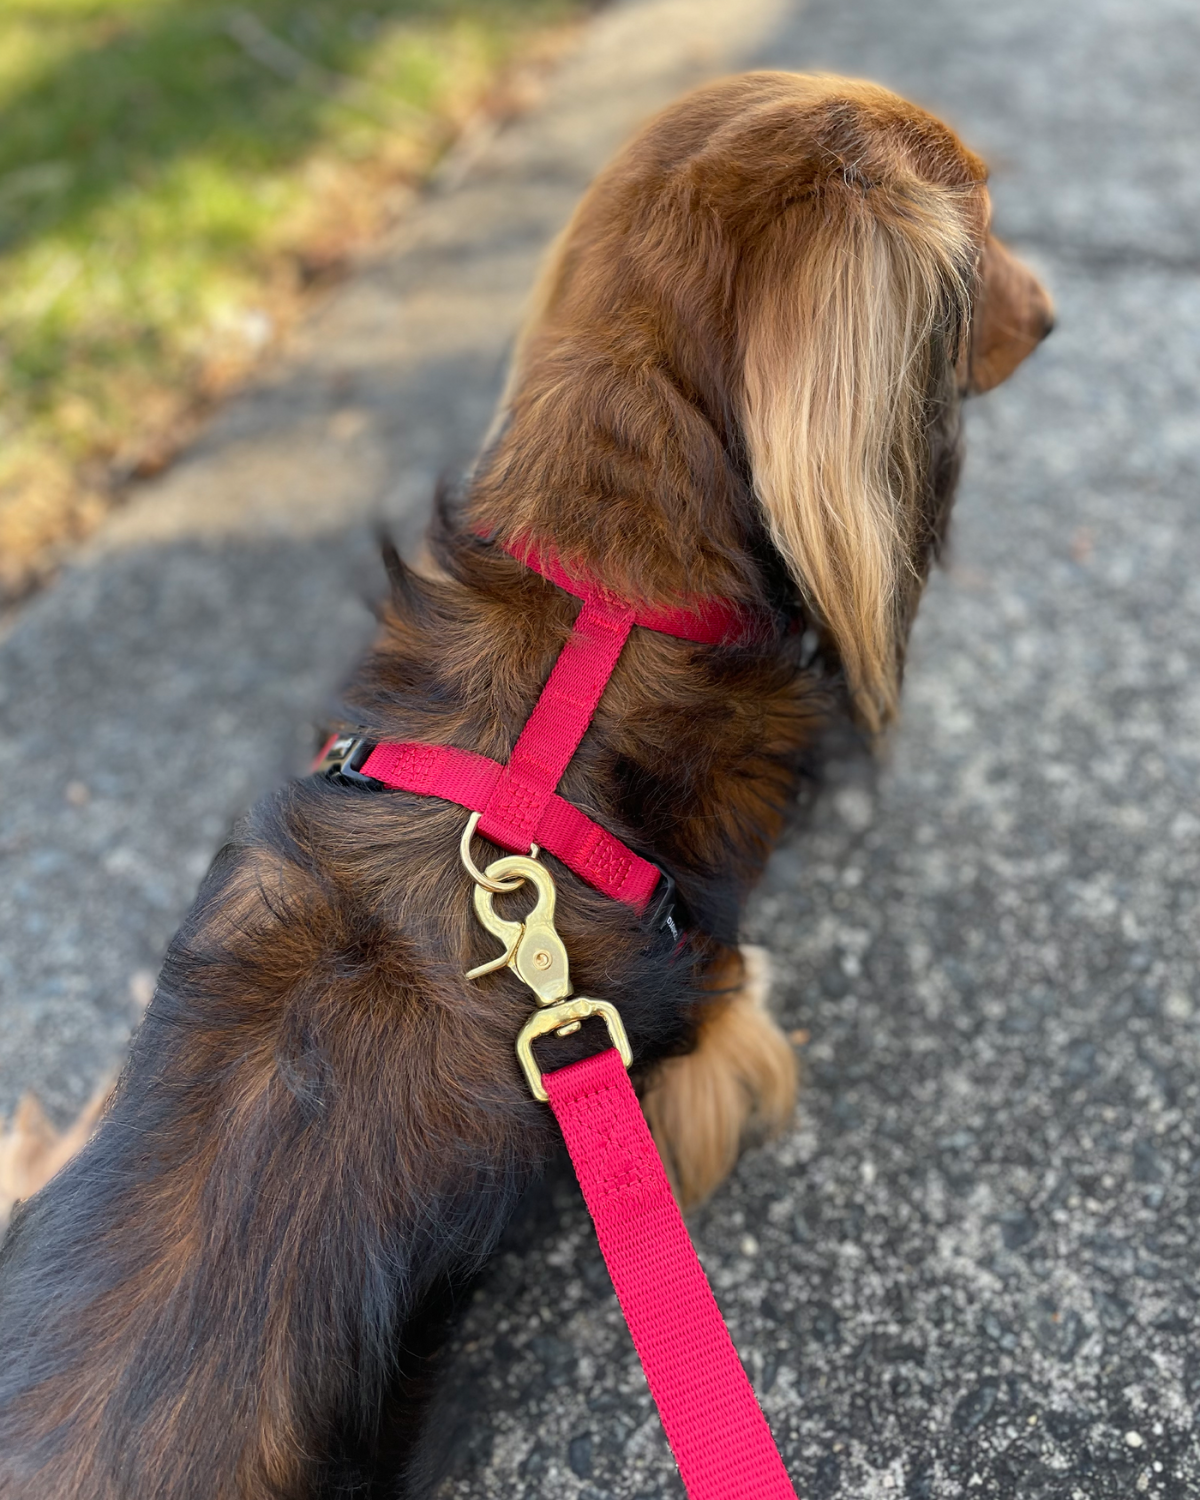 DJANGO Adjustable Hands-Free Adventure Dog Leash features solid cast brass hardware and pairs perfectly with your favorite DJANGO Adventure Dog Harness and Collar set - djangobrand.com